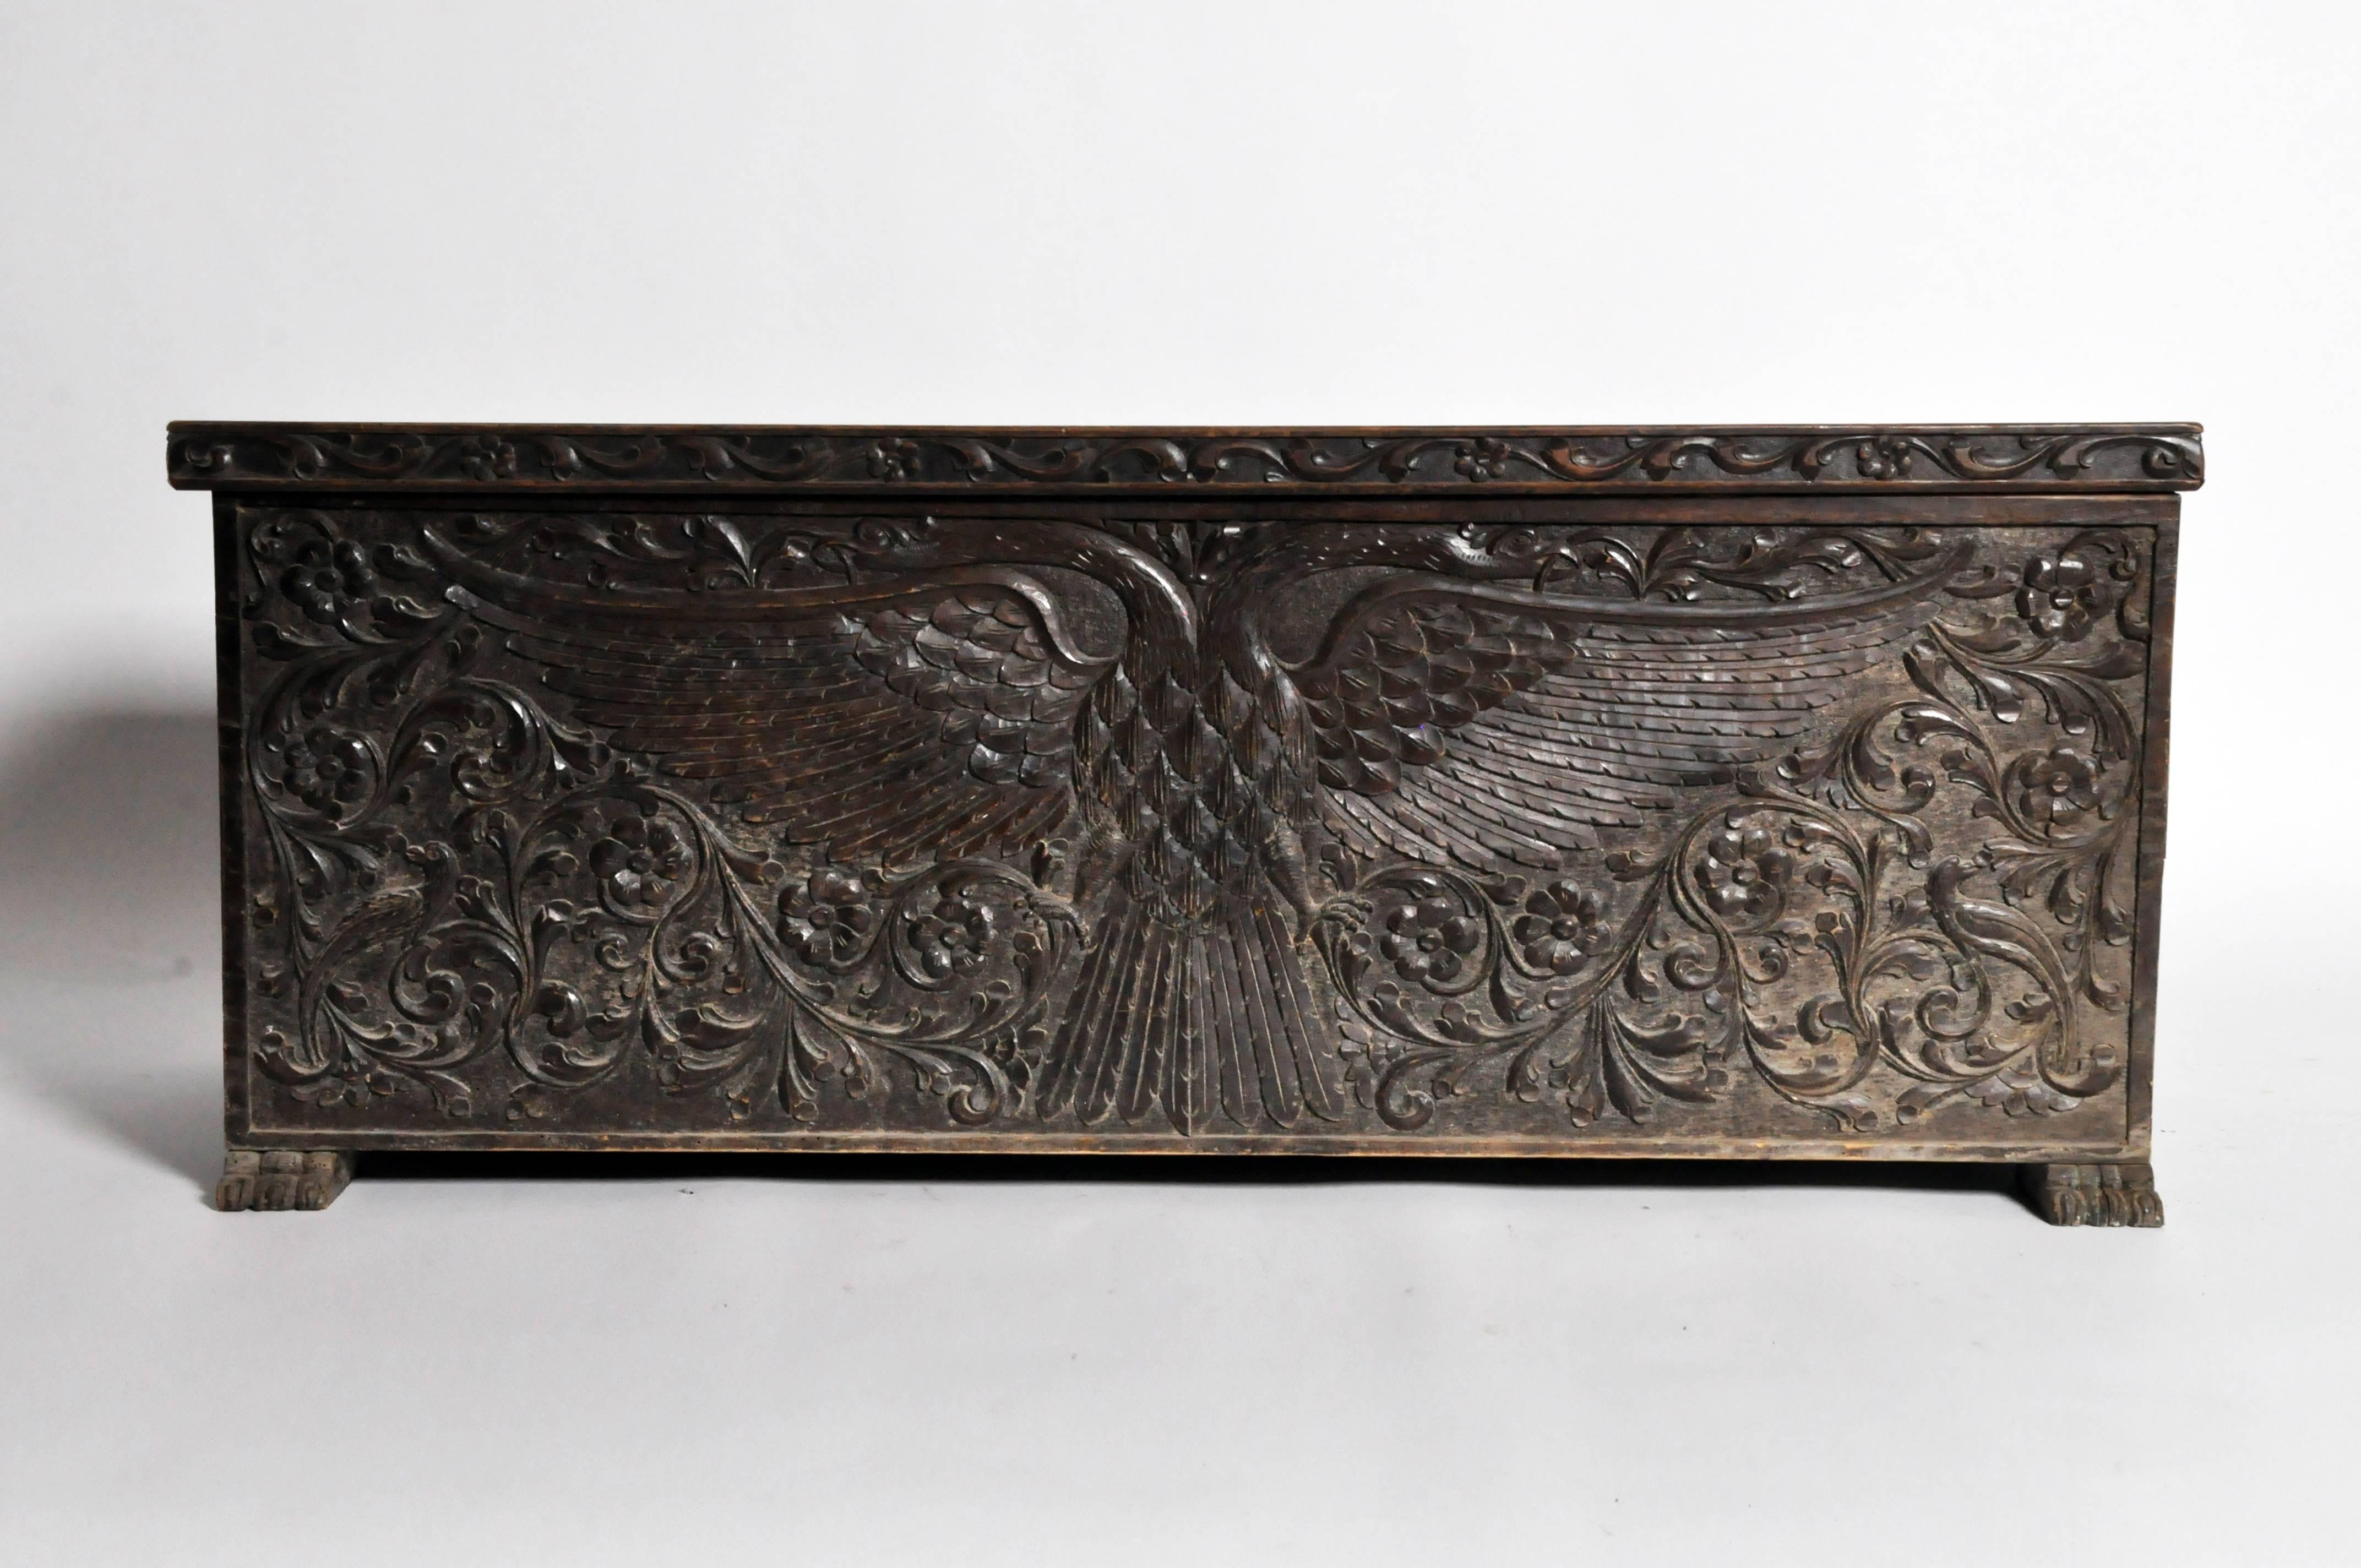 This impressive imperial double-eagle design coffer is from Austria-Hungary and is made from oak and pine wood, circa 19th century.